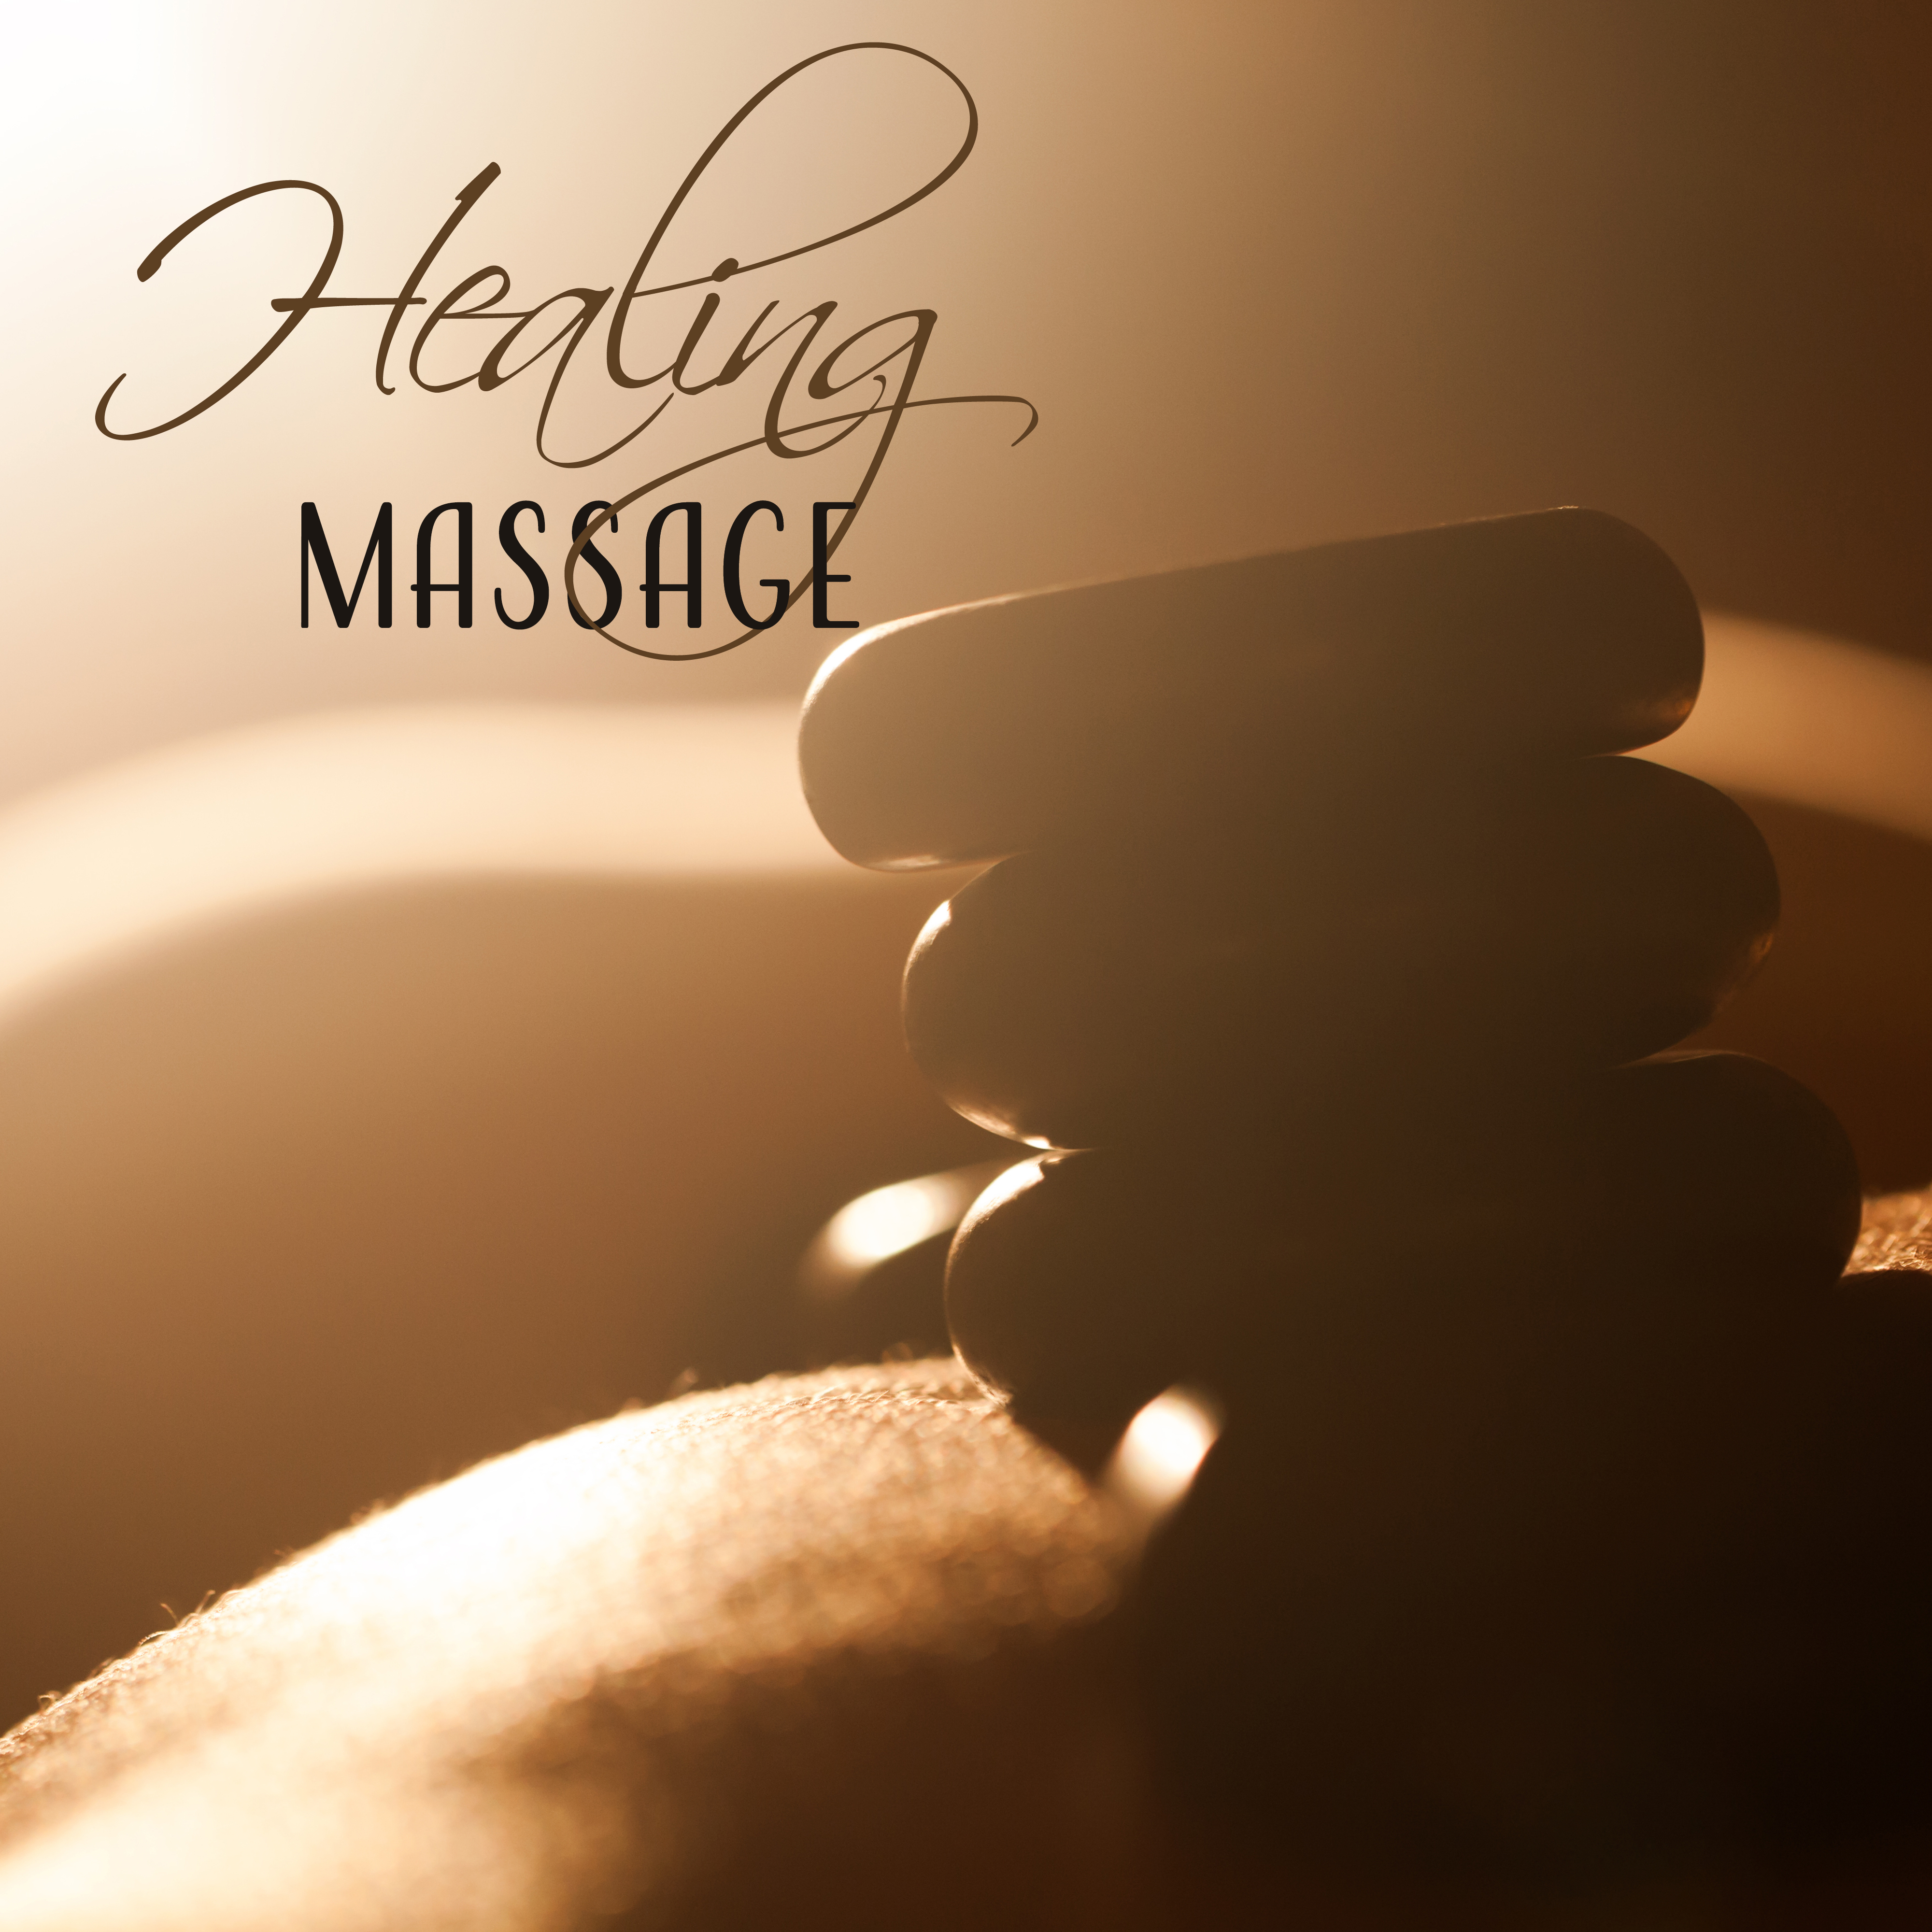 Healing Massage – Therapy for Body, Stress Relief, Serenity Zen Spa, Massage Music, Pure Rest